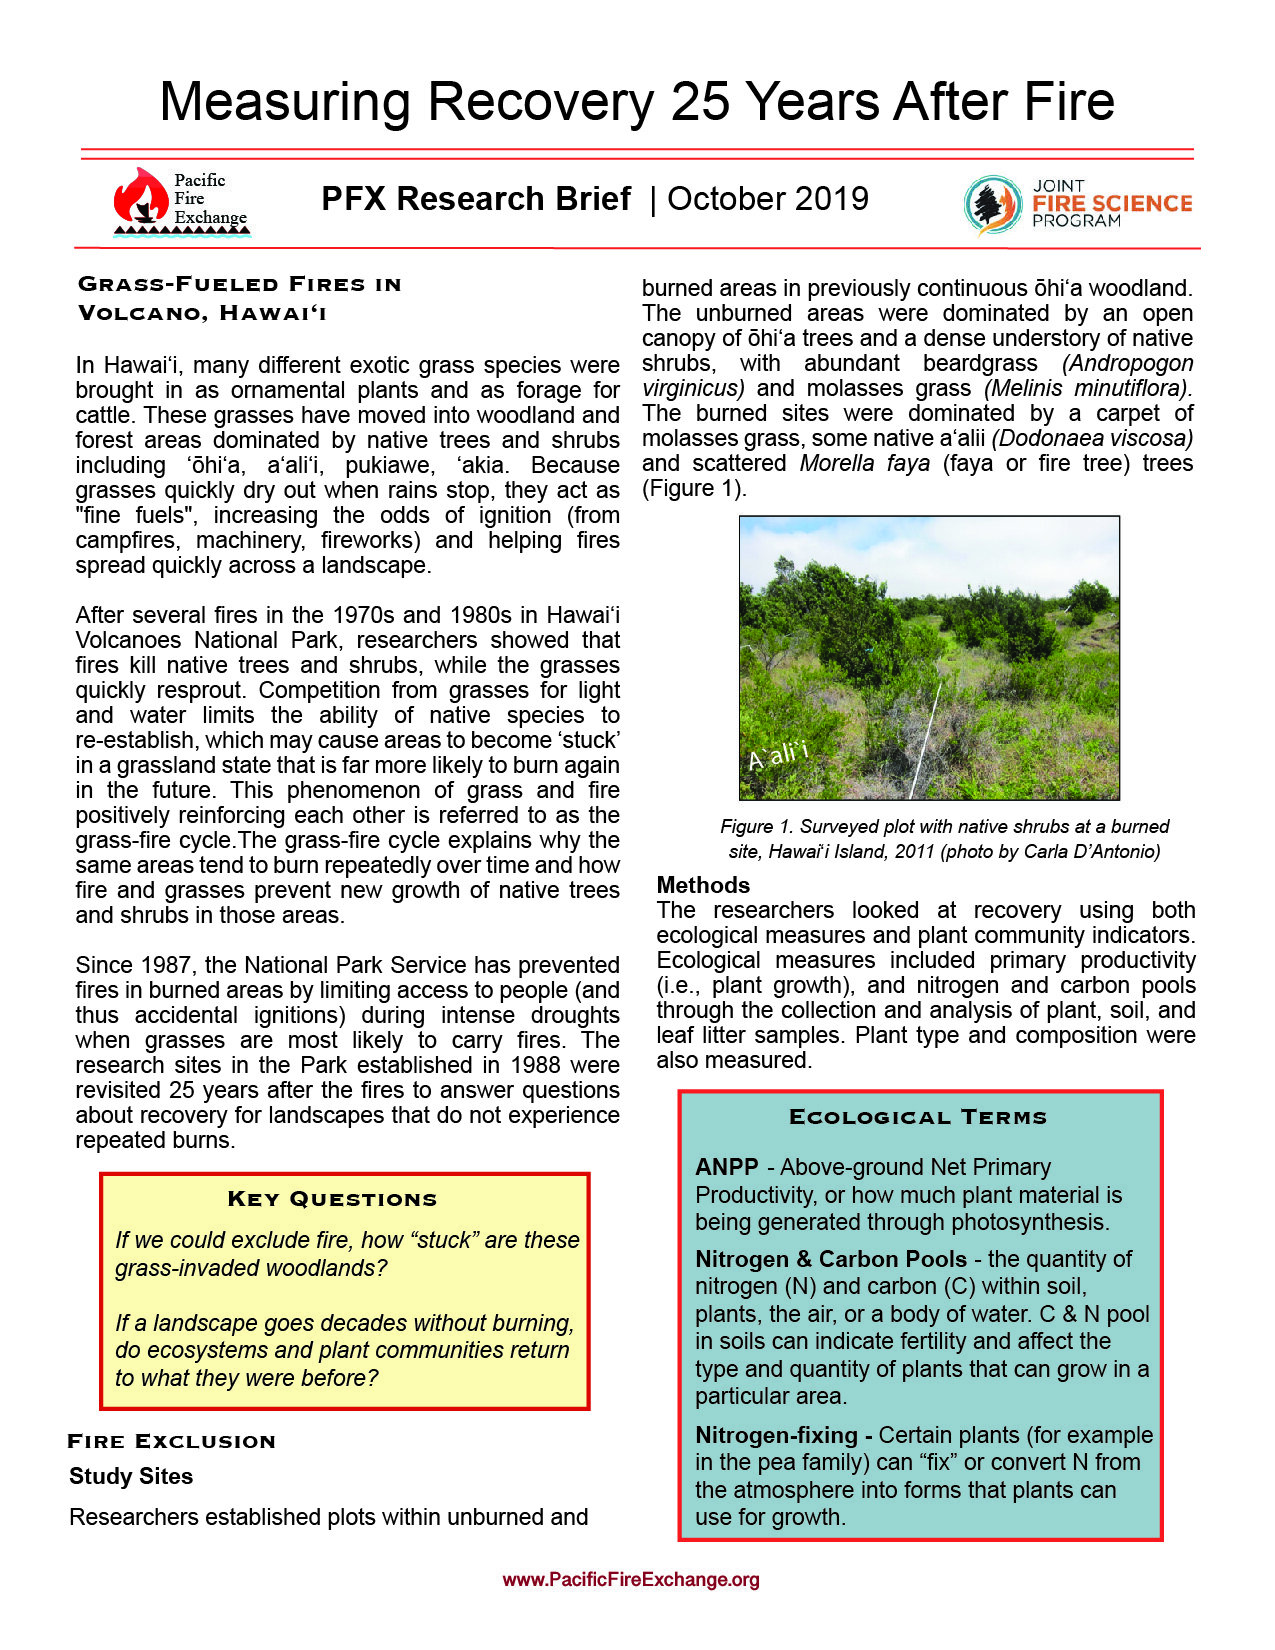 PFX_ResearchBrief_Recovery25Years_10.14.19-01